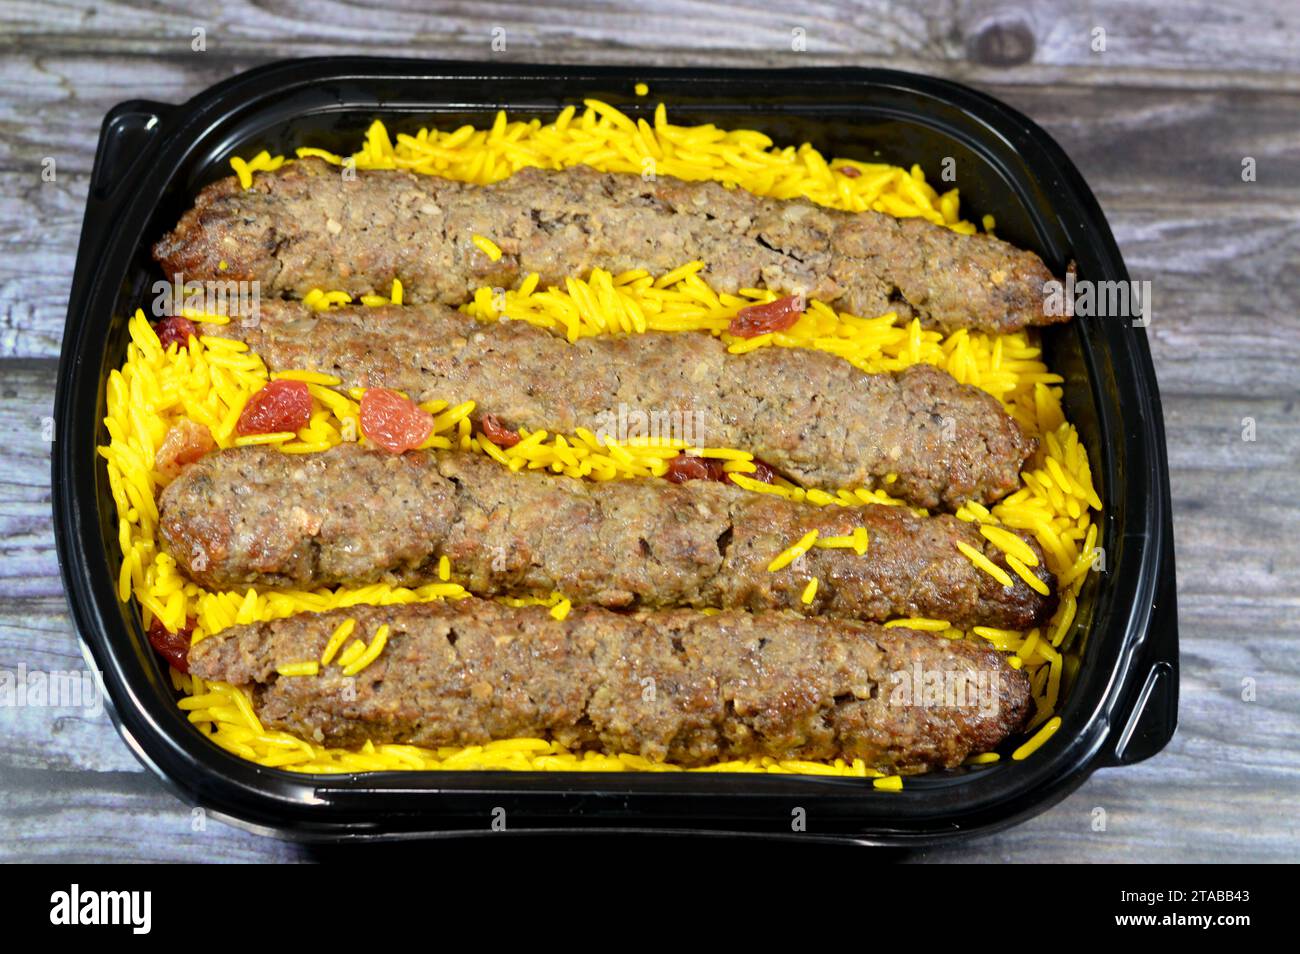 Arabic cuisine traditional food beef  Kofta, kebab and tarb kofta shish which is minced meat with Basmati rice and raisins, oriental grilled barbecued Stock Photo